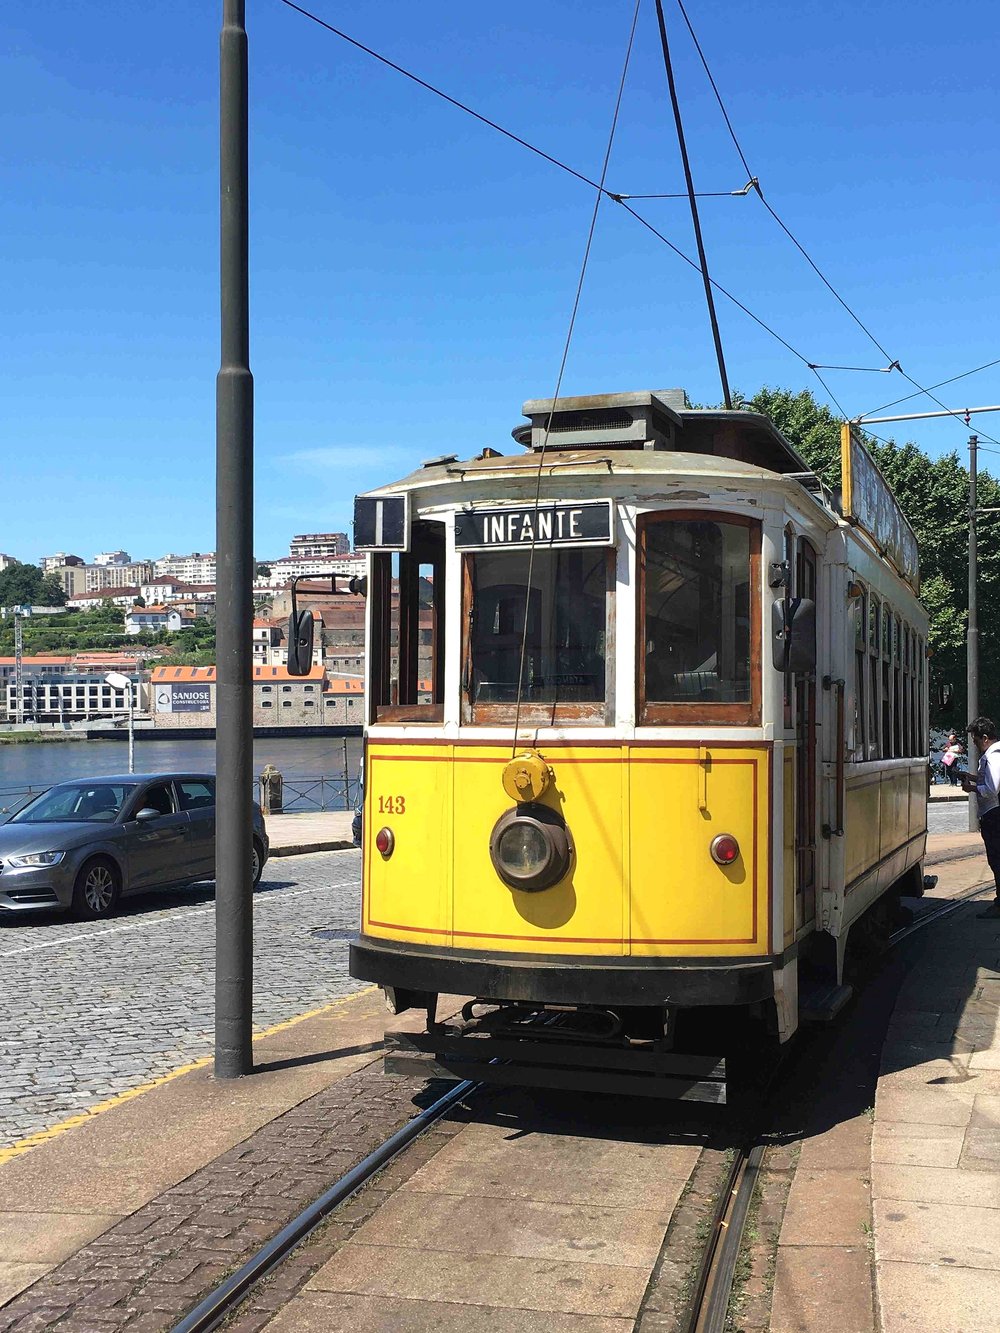 Linha 1 tram from central Porto to the beaches at Foz